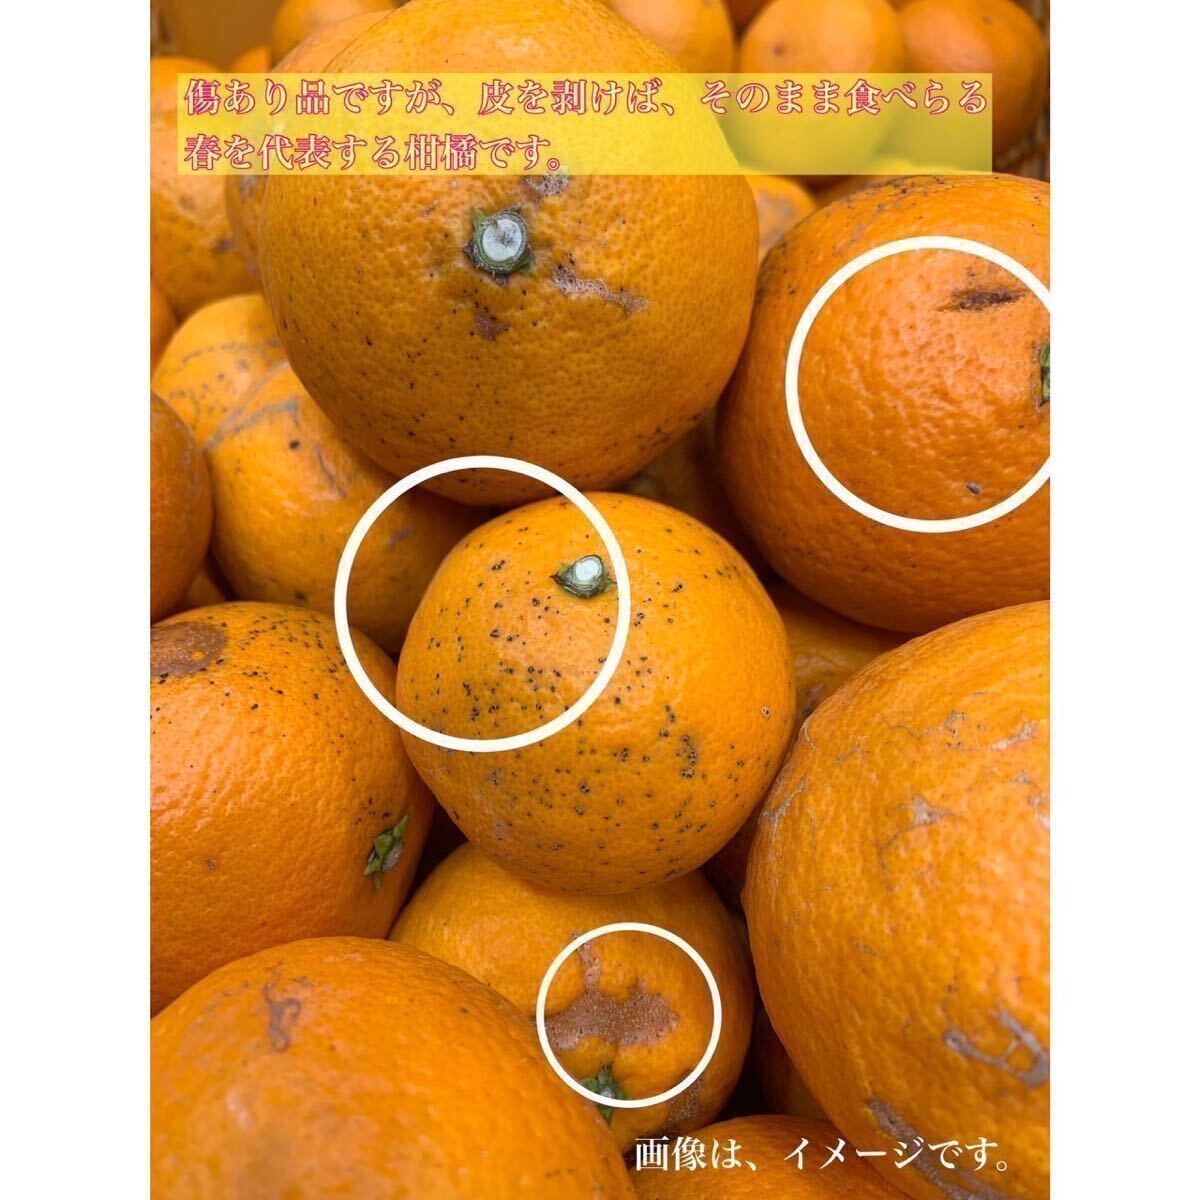  Wakayama prefecture Kiyoshi see orange fruit home use b goods sale first come, first served .. remainder little 